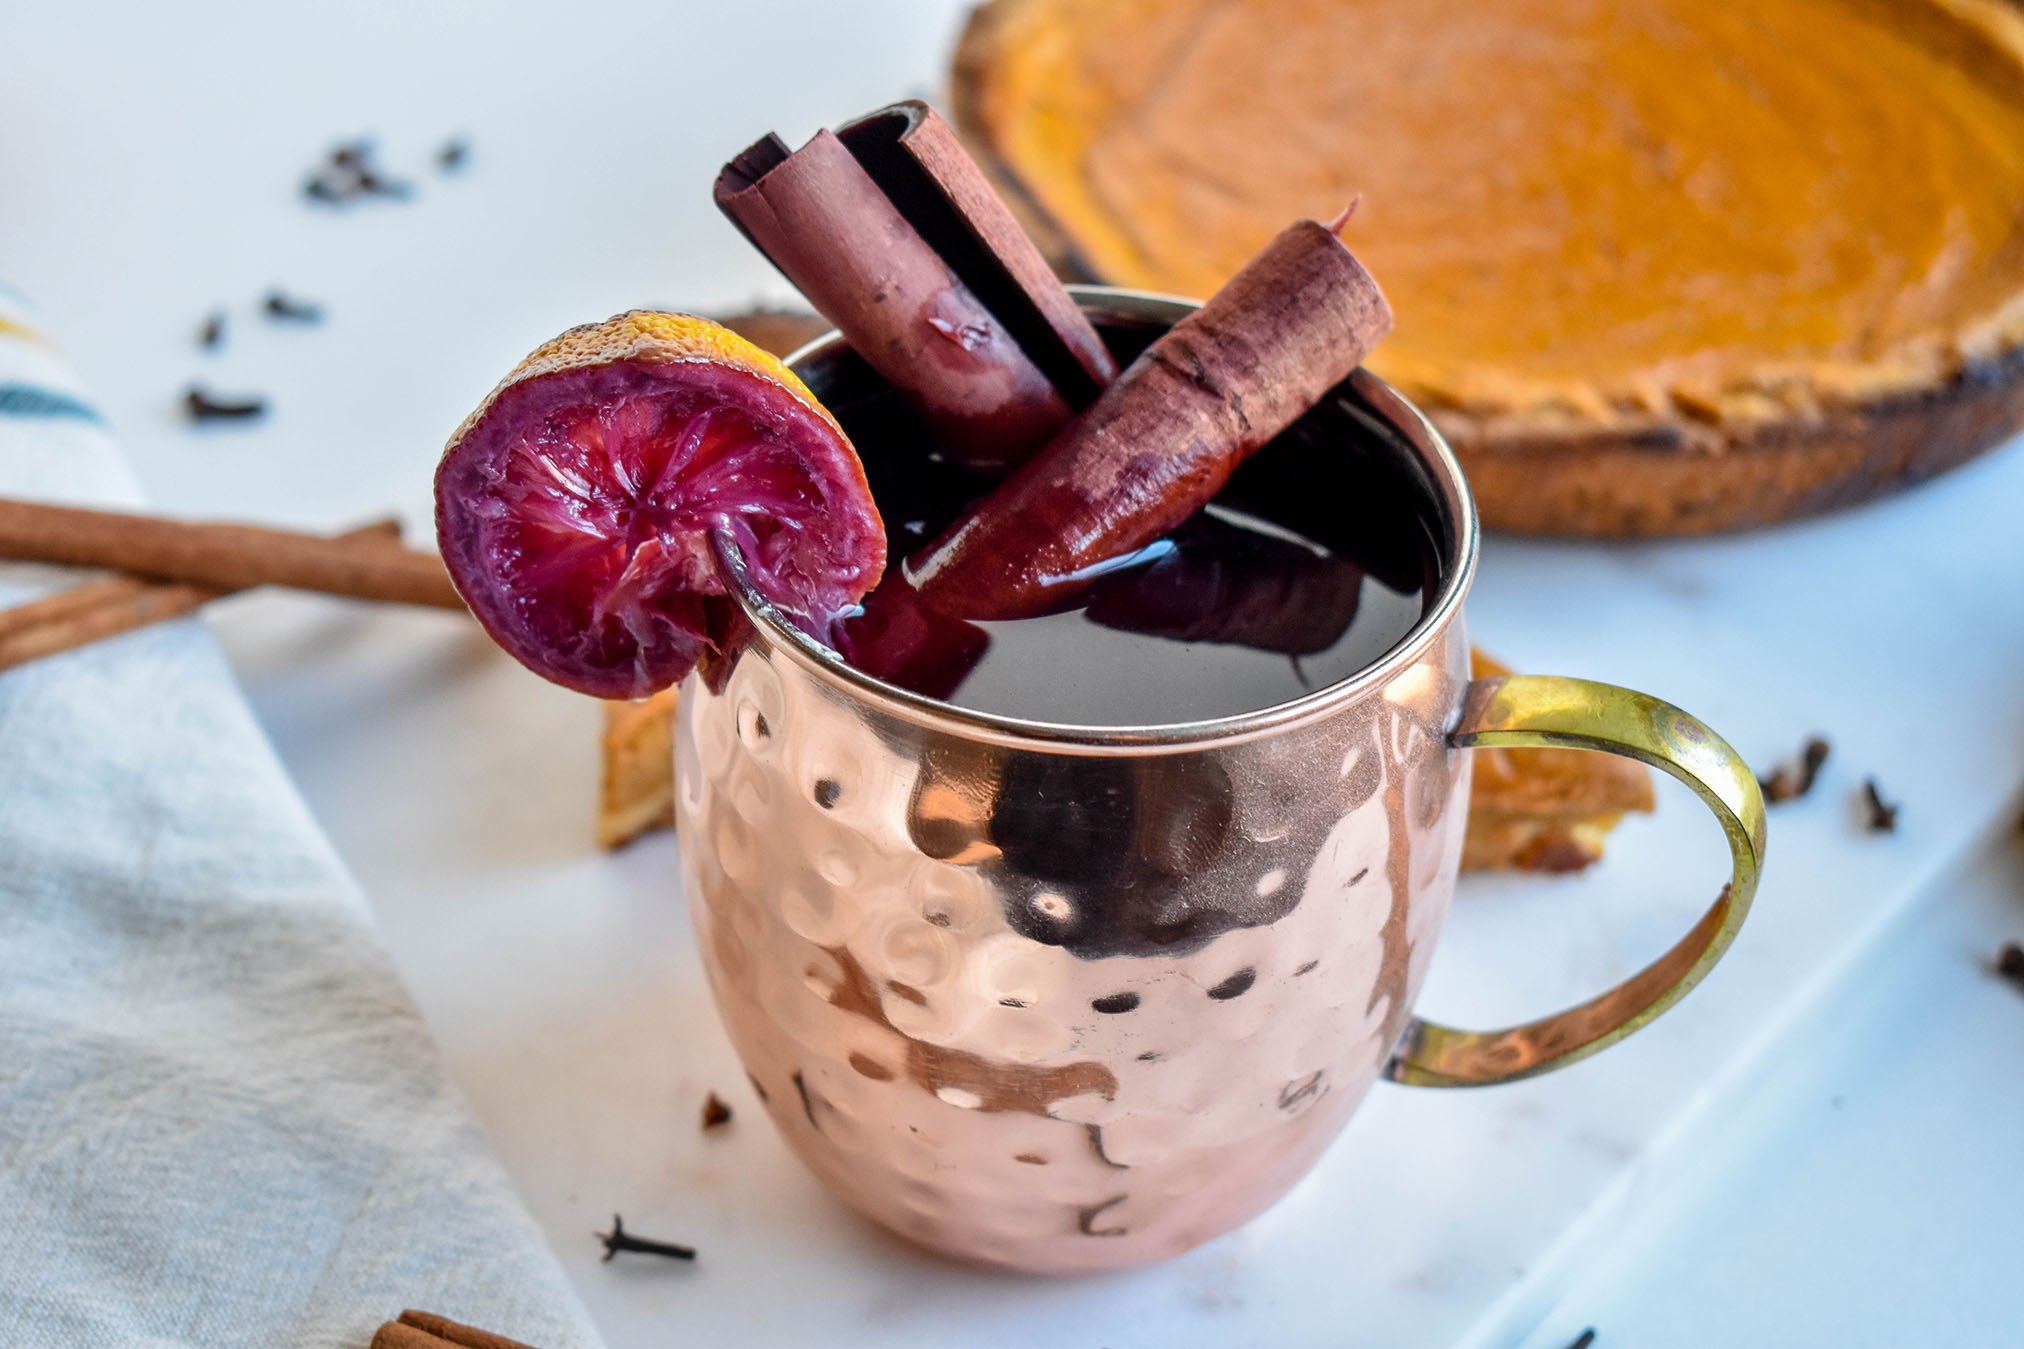 Glühwein in a mosque mule cup with pumpkin pie in the background or marble